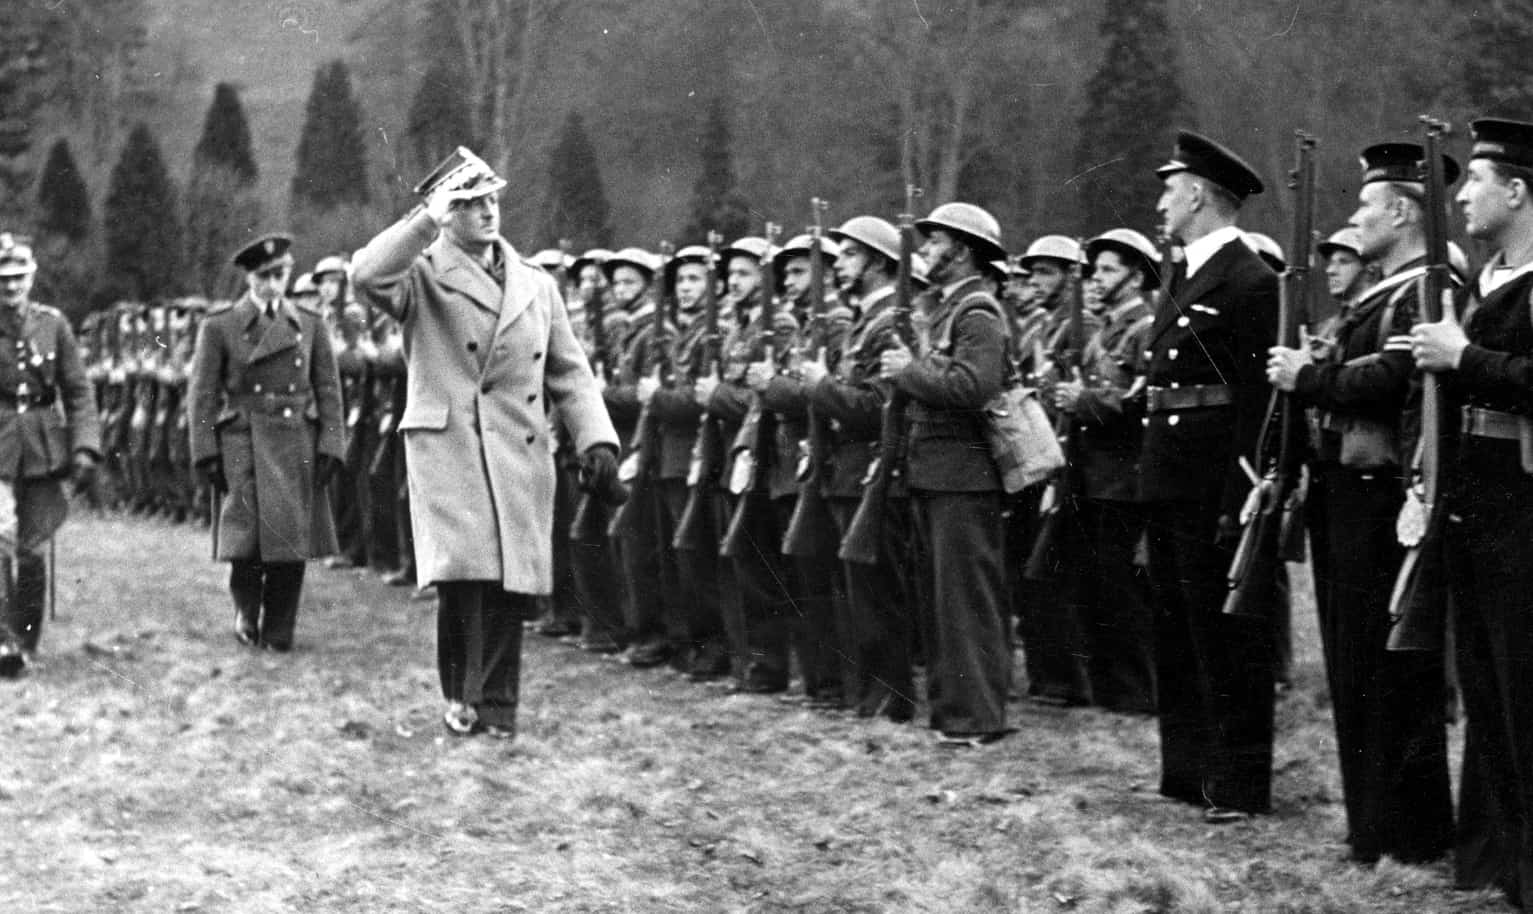 Prime Minister of the Republic of Poland and Commander-In-Chief General Władysław Sikorski (in a light coat, saluting), accompanied by, among others, Minister of National Defence General Marian Kukiel, walks in front of the Polish Army's guard of honour (Great Britain, 1940-1943). Source: National Digital Archive (NAC).